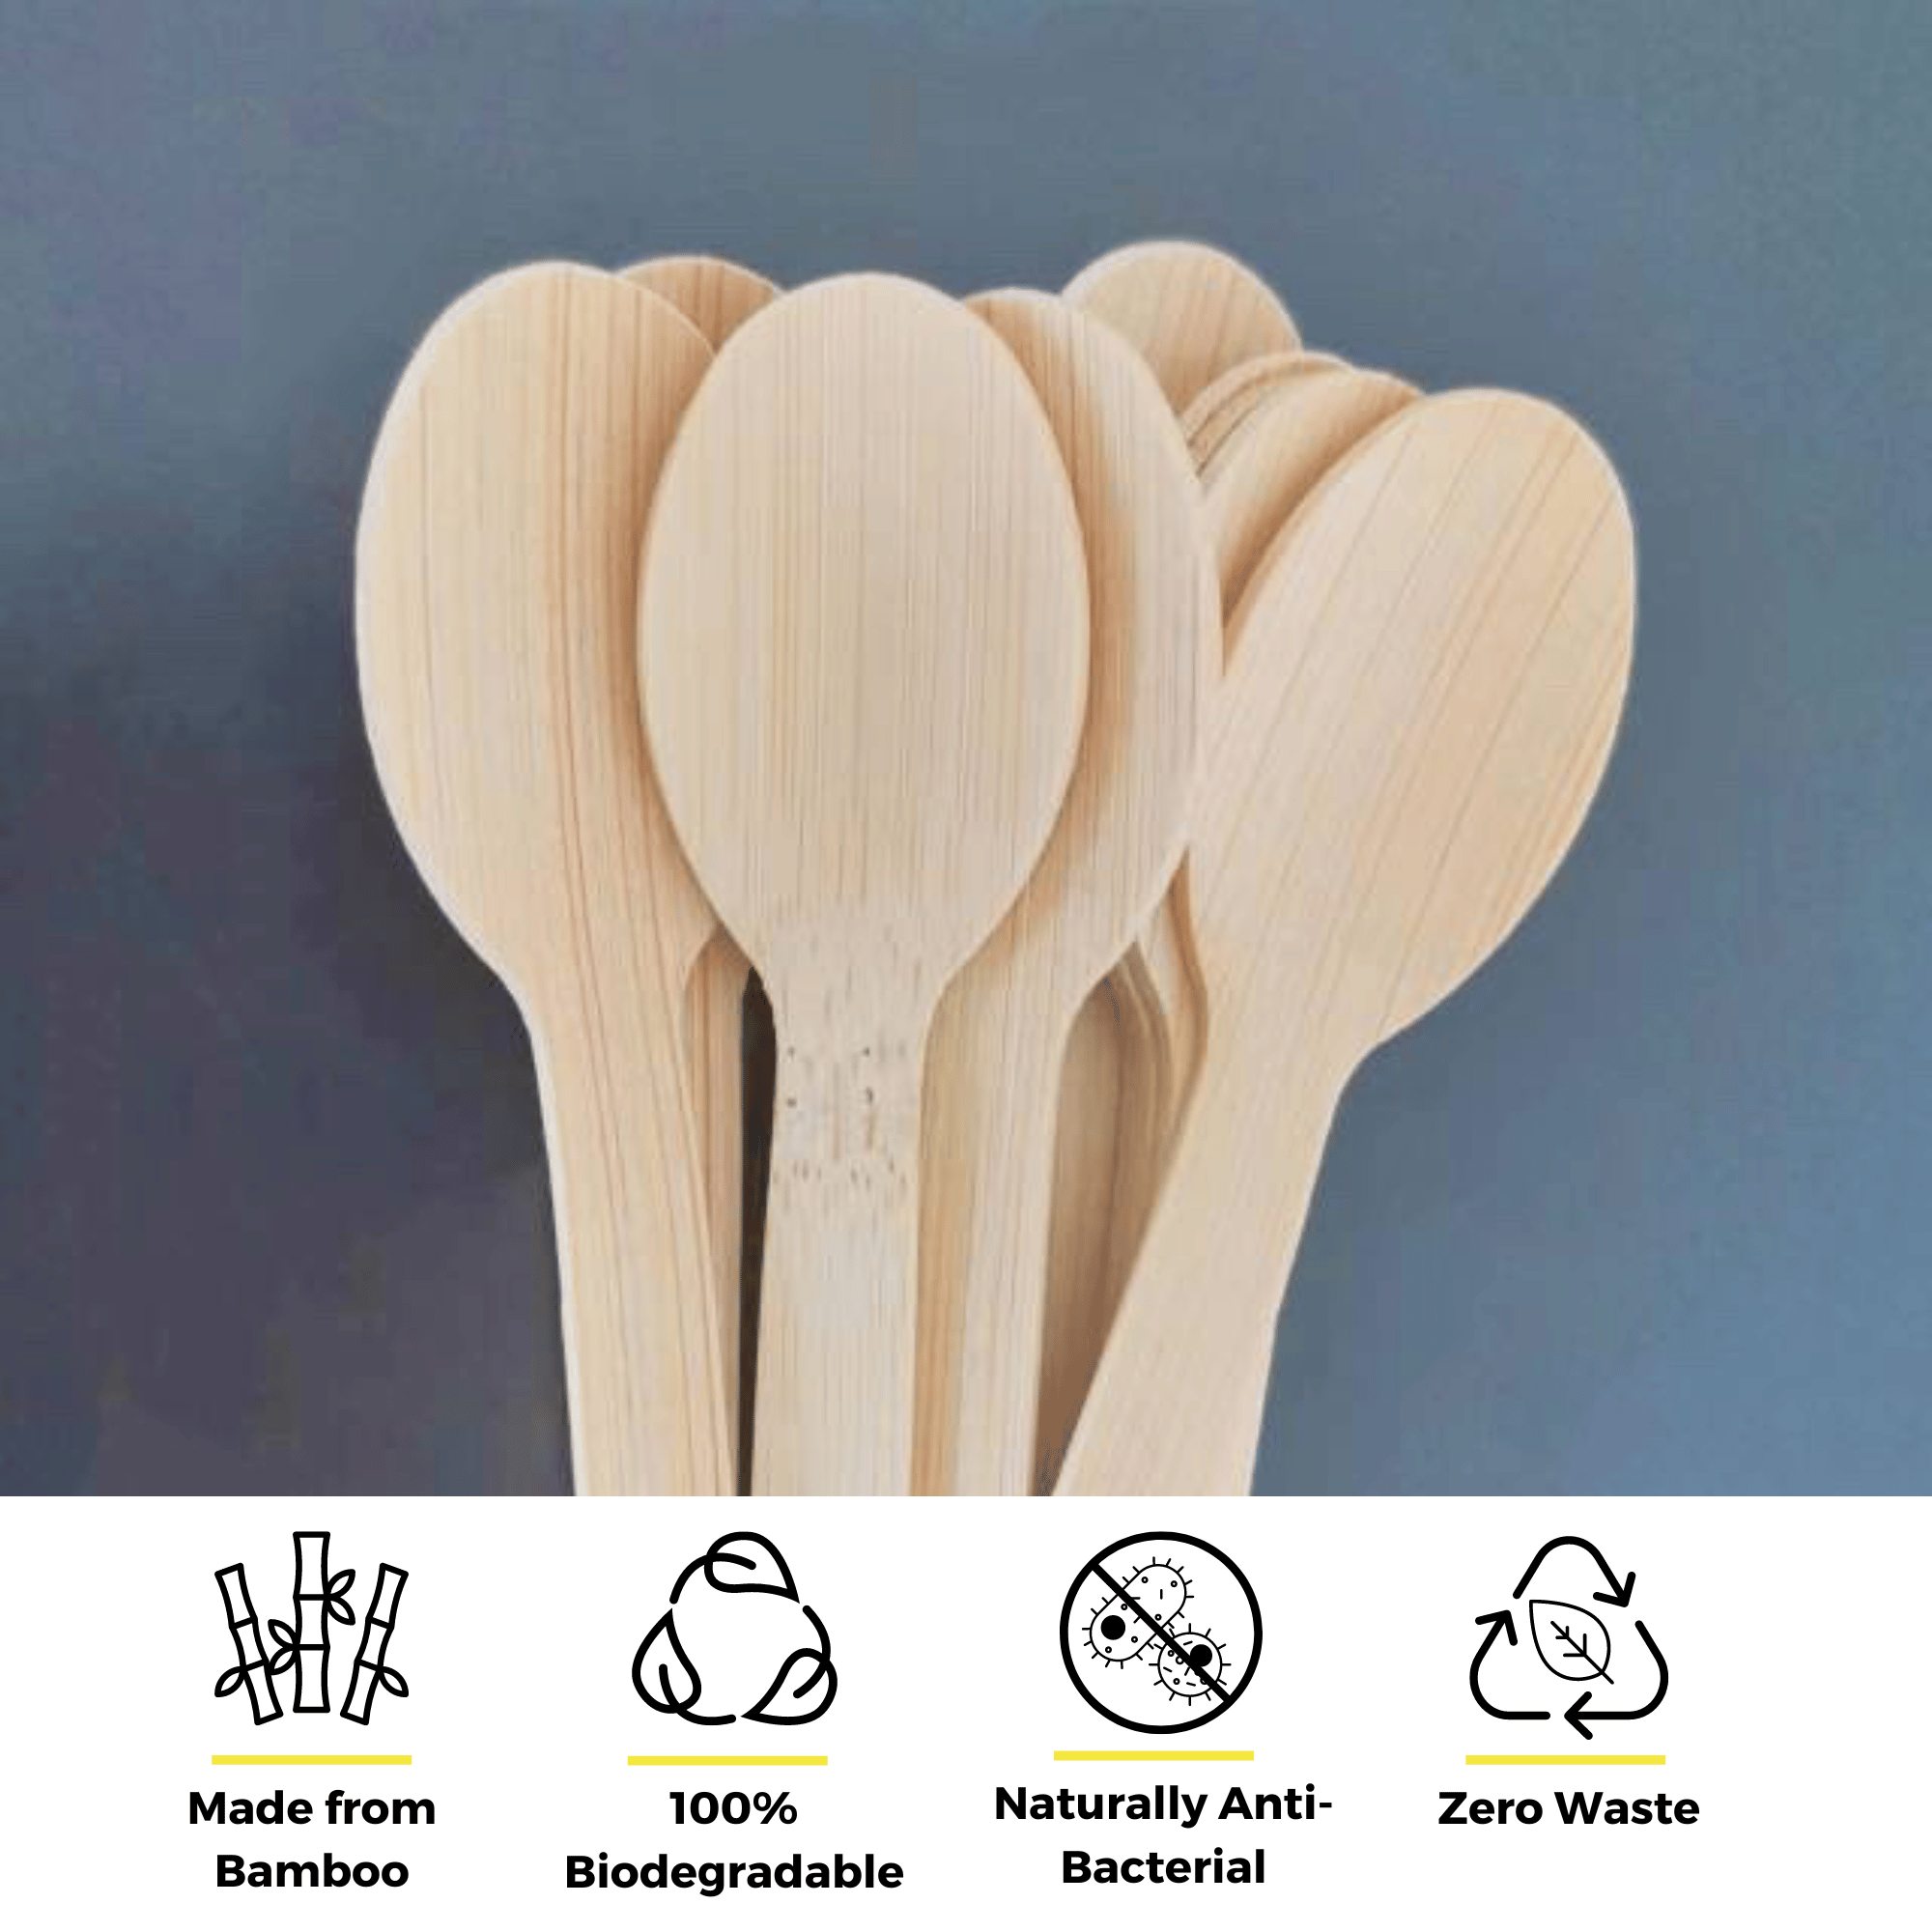 A bundle of bamboo spoons by Holy City Straw Co. grouped together on a dark background, showcasing the product's smooth, natural texture. Accompanying eco-friendly feature icons below highlight that the spoons are Made from Bamboo, 100% Biodegradable, Liquid/Heat Resistant, and contribute to Zero Waste